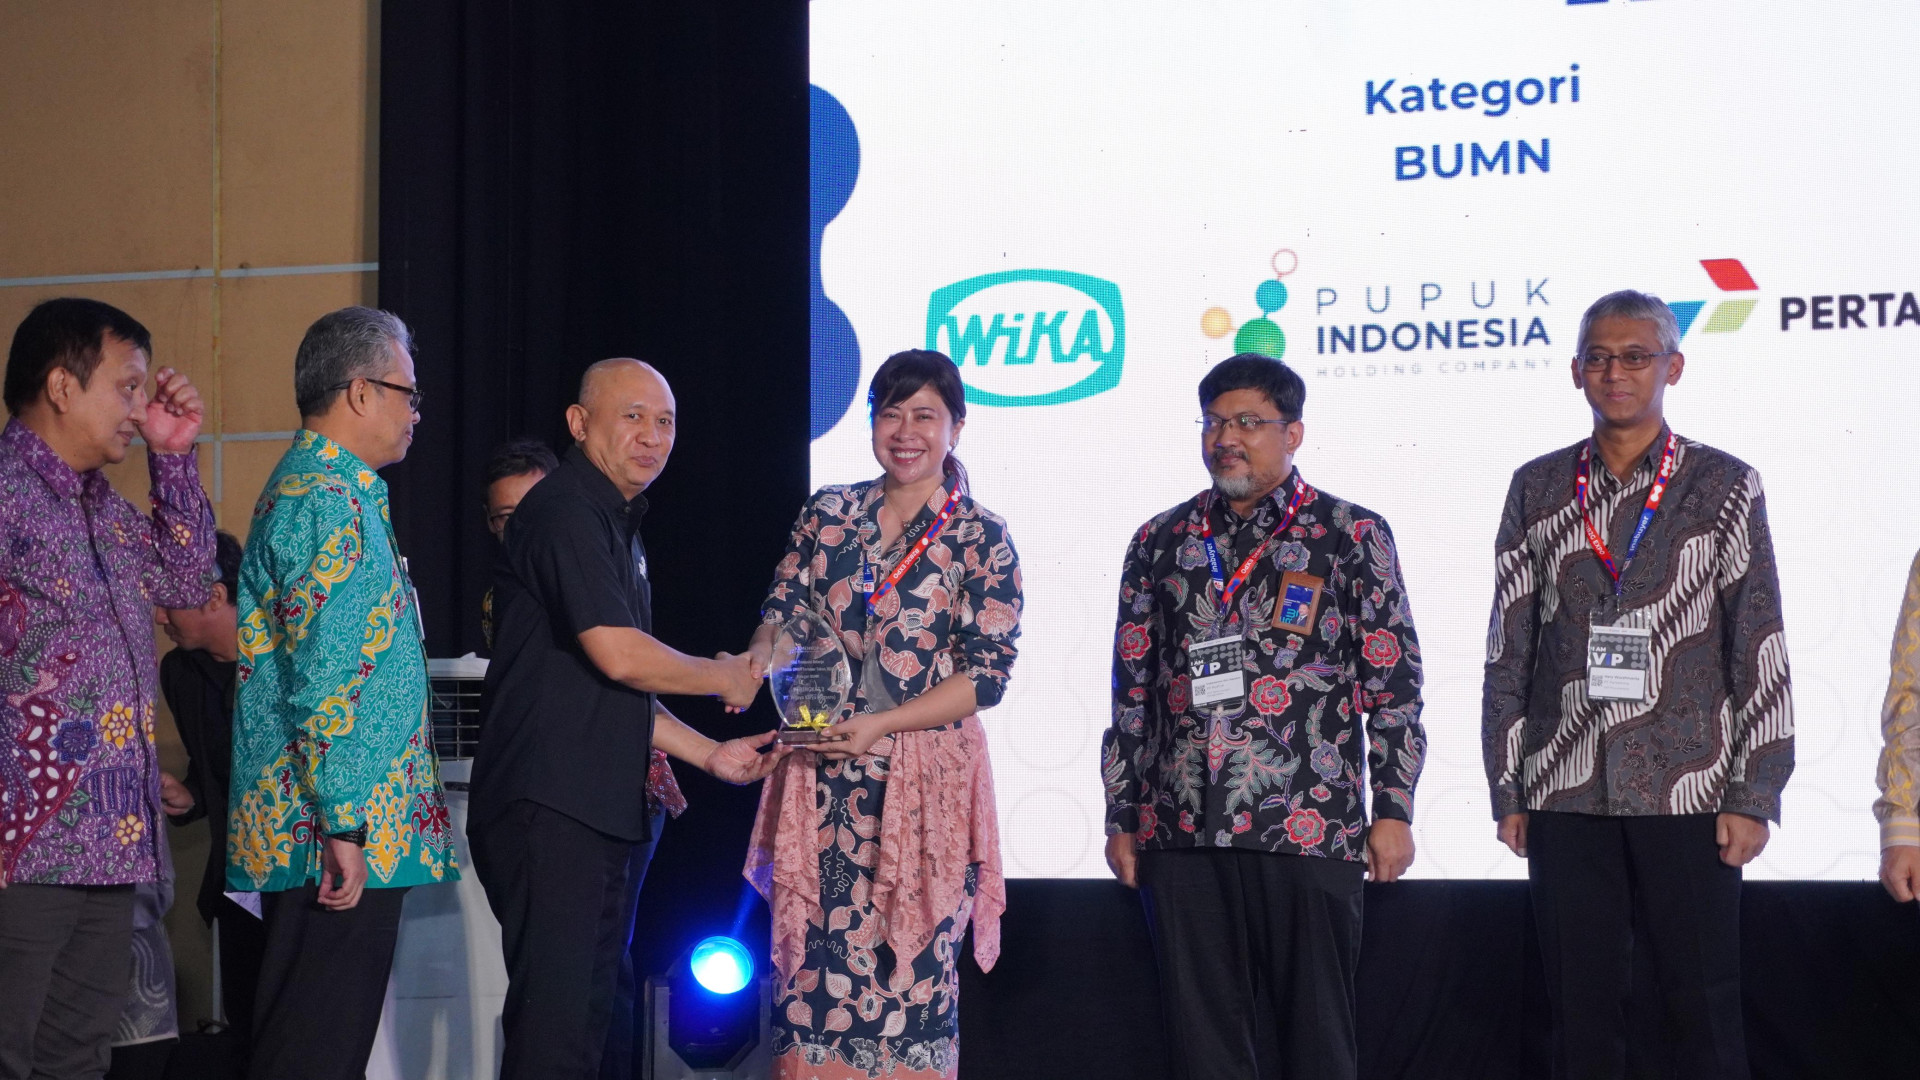 WIKA Entered the Top 3 BUMNs with the Largest Transactions in PaDi UMKM Highest in BUMN Karya Image